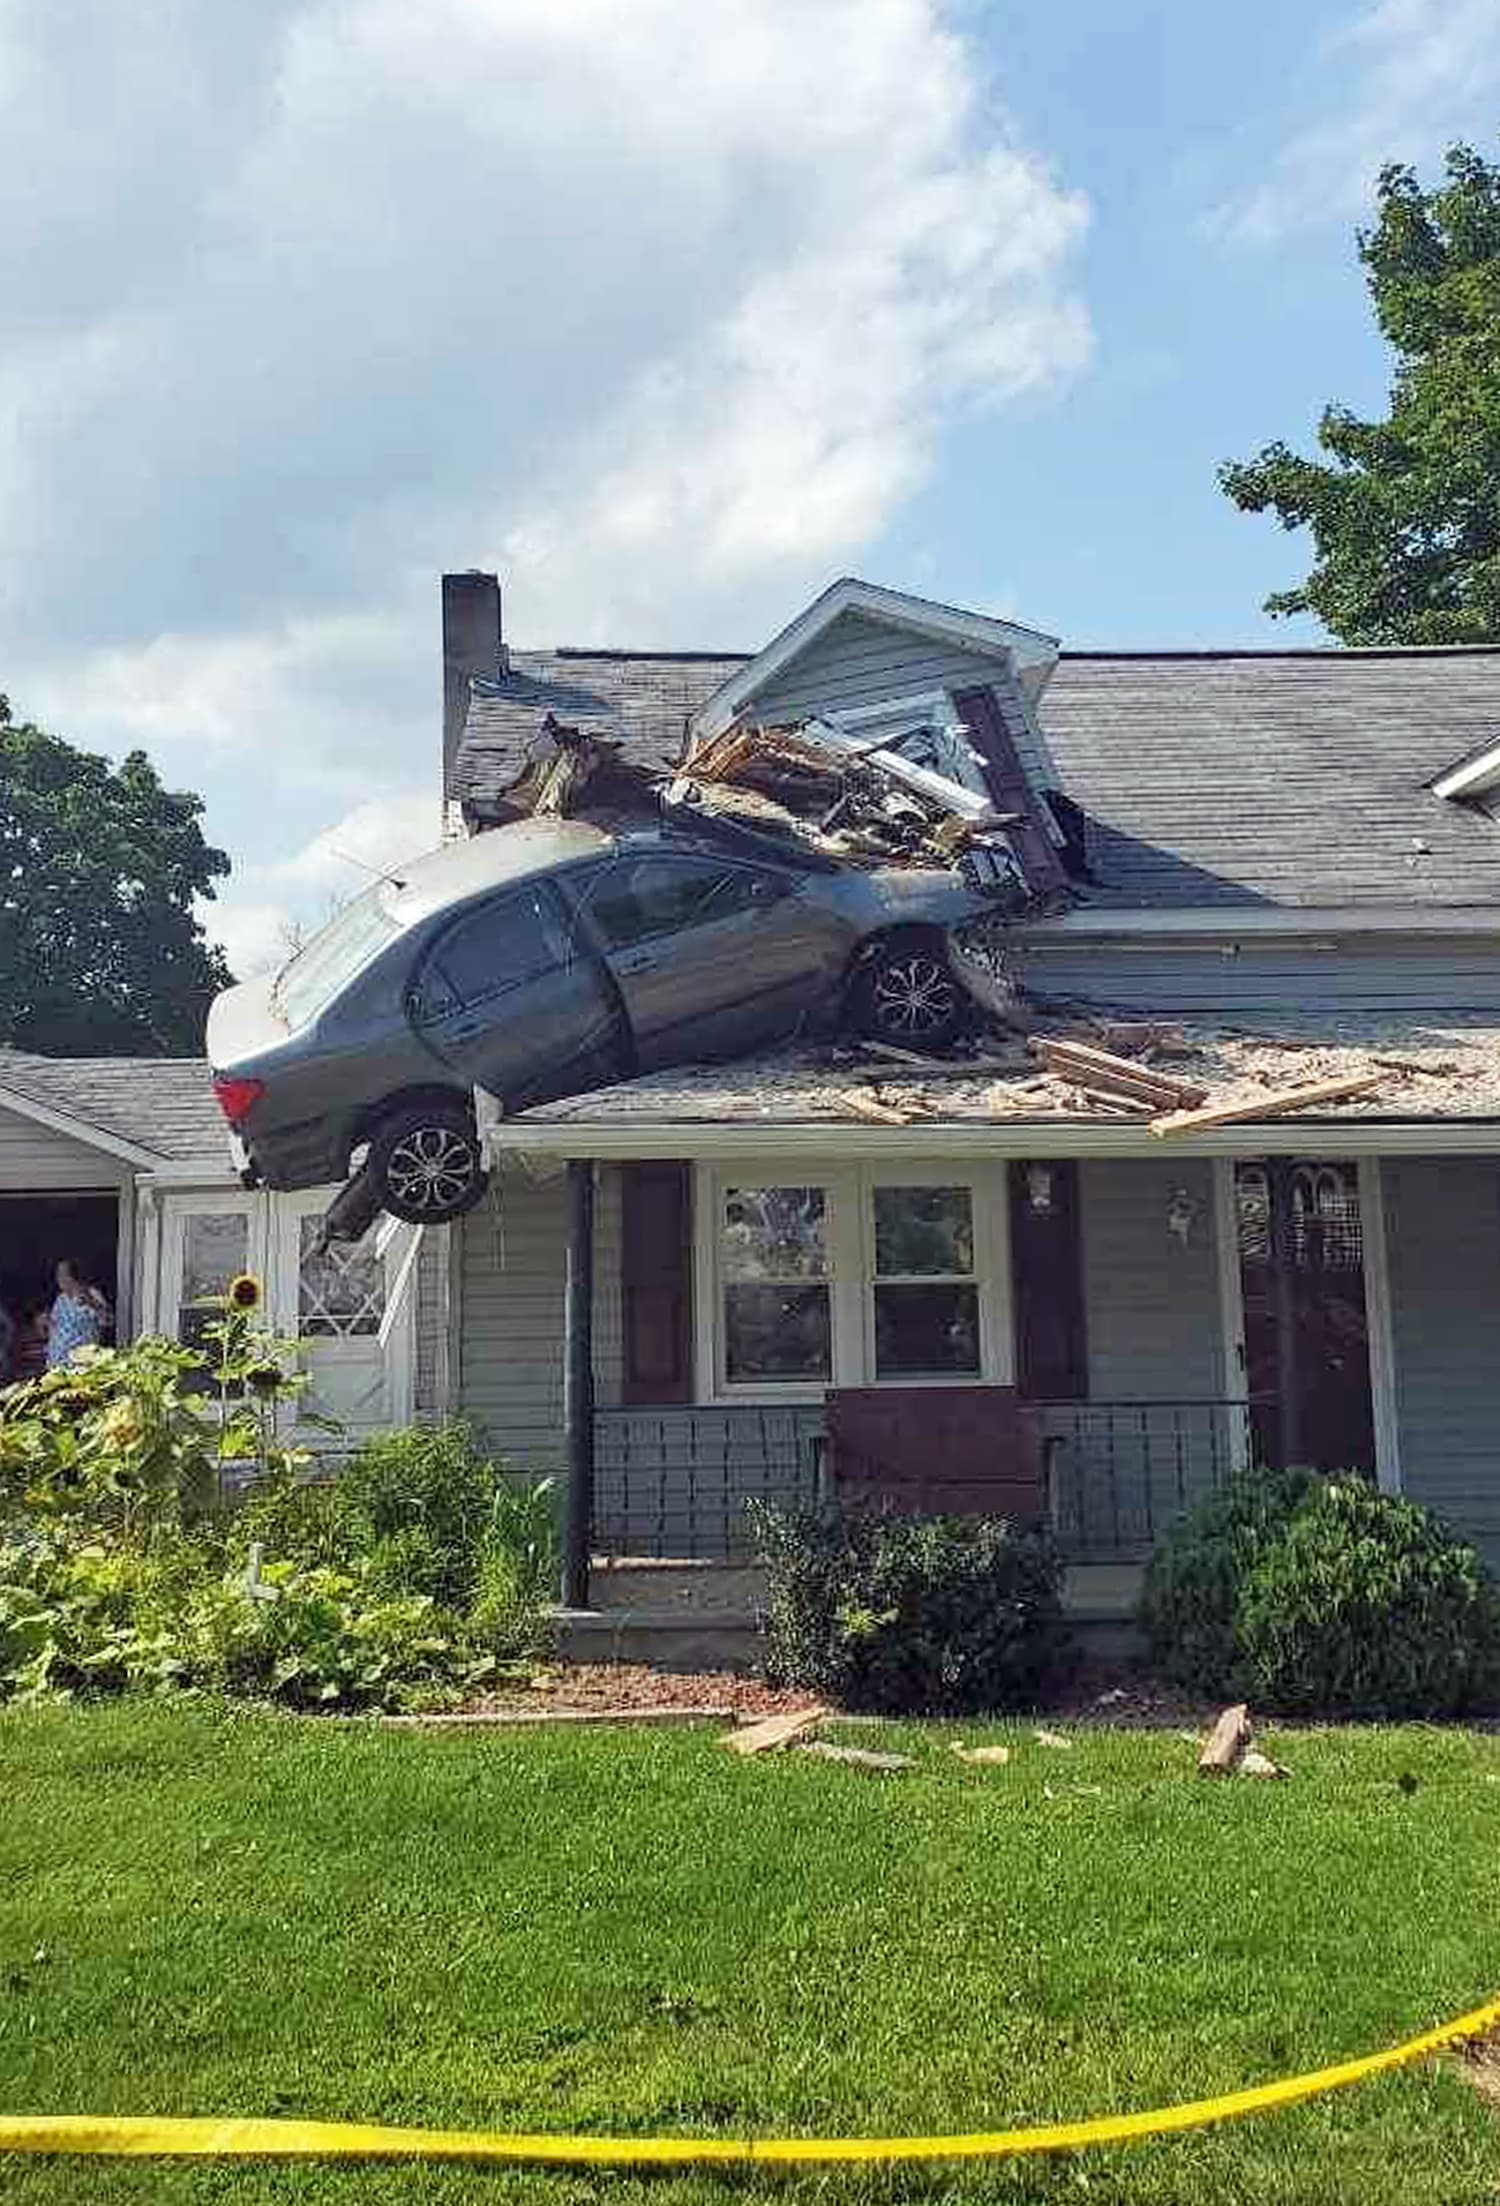 Car crashes into second floor of Pennsylvania home in 'intentional